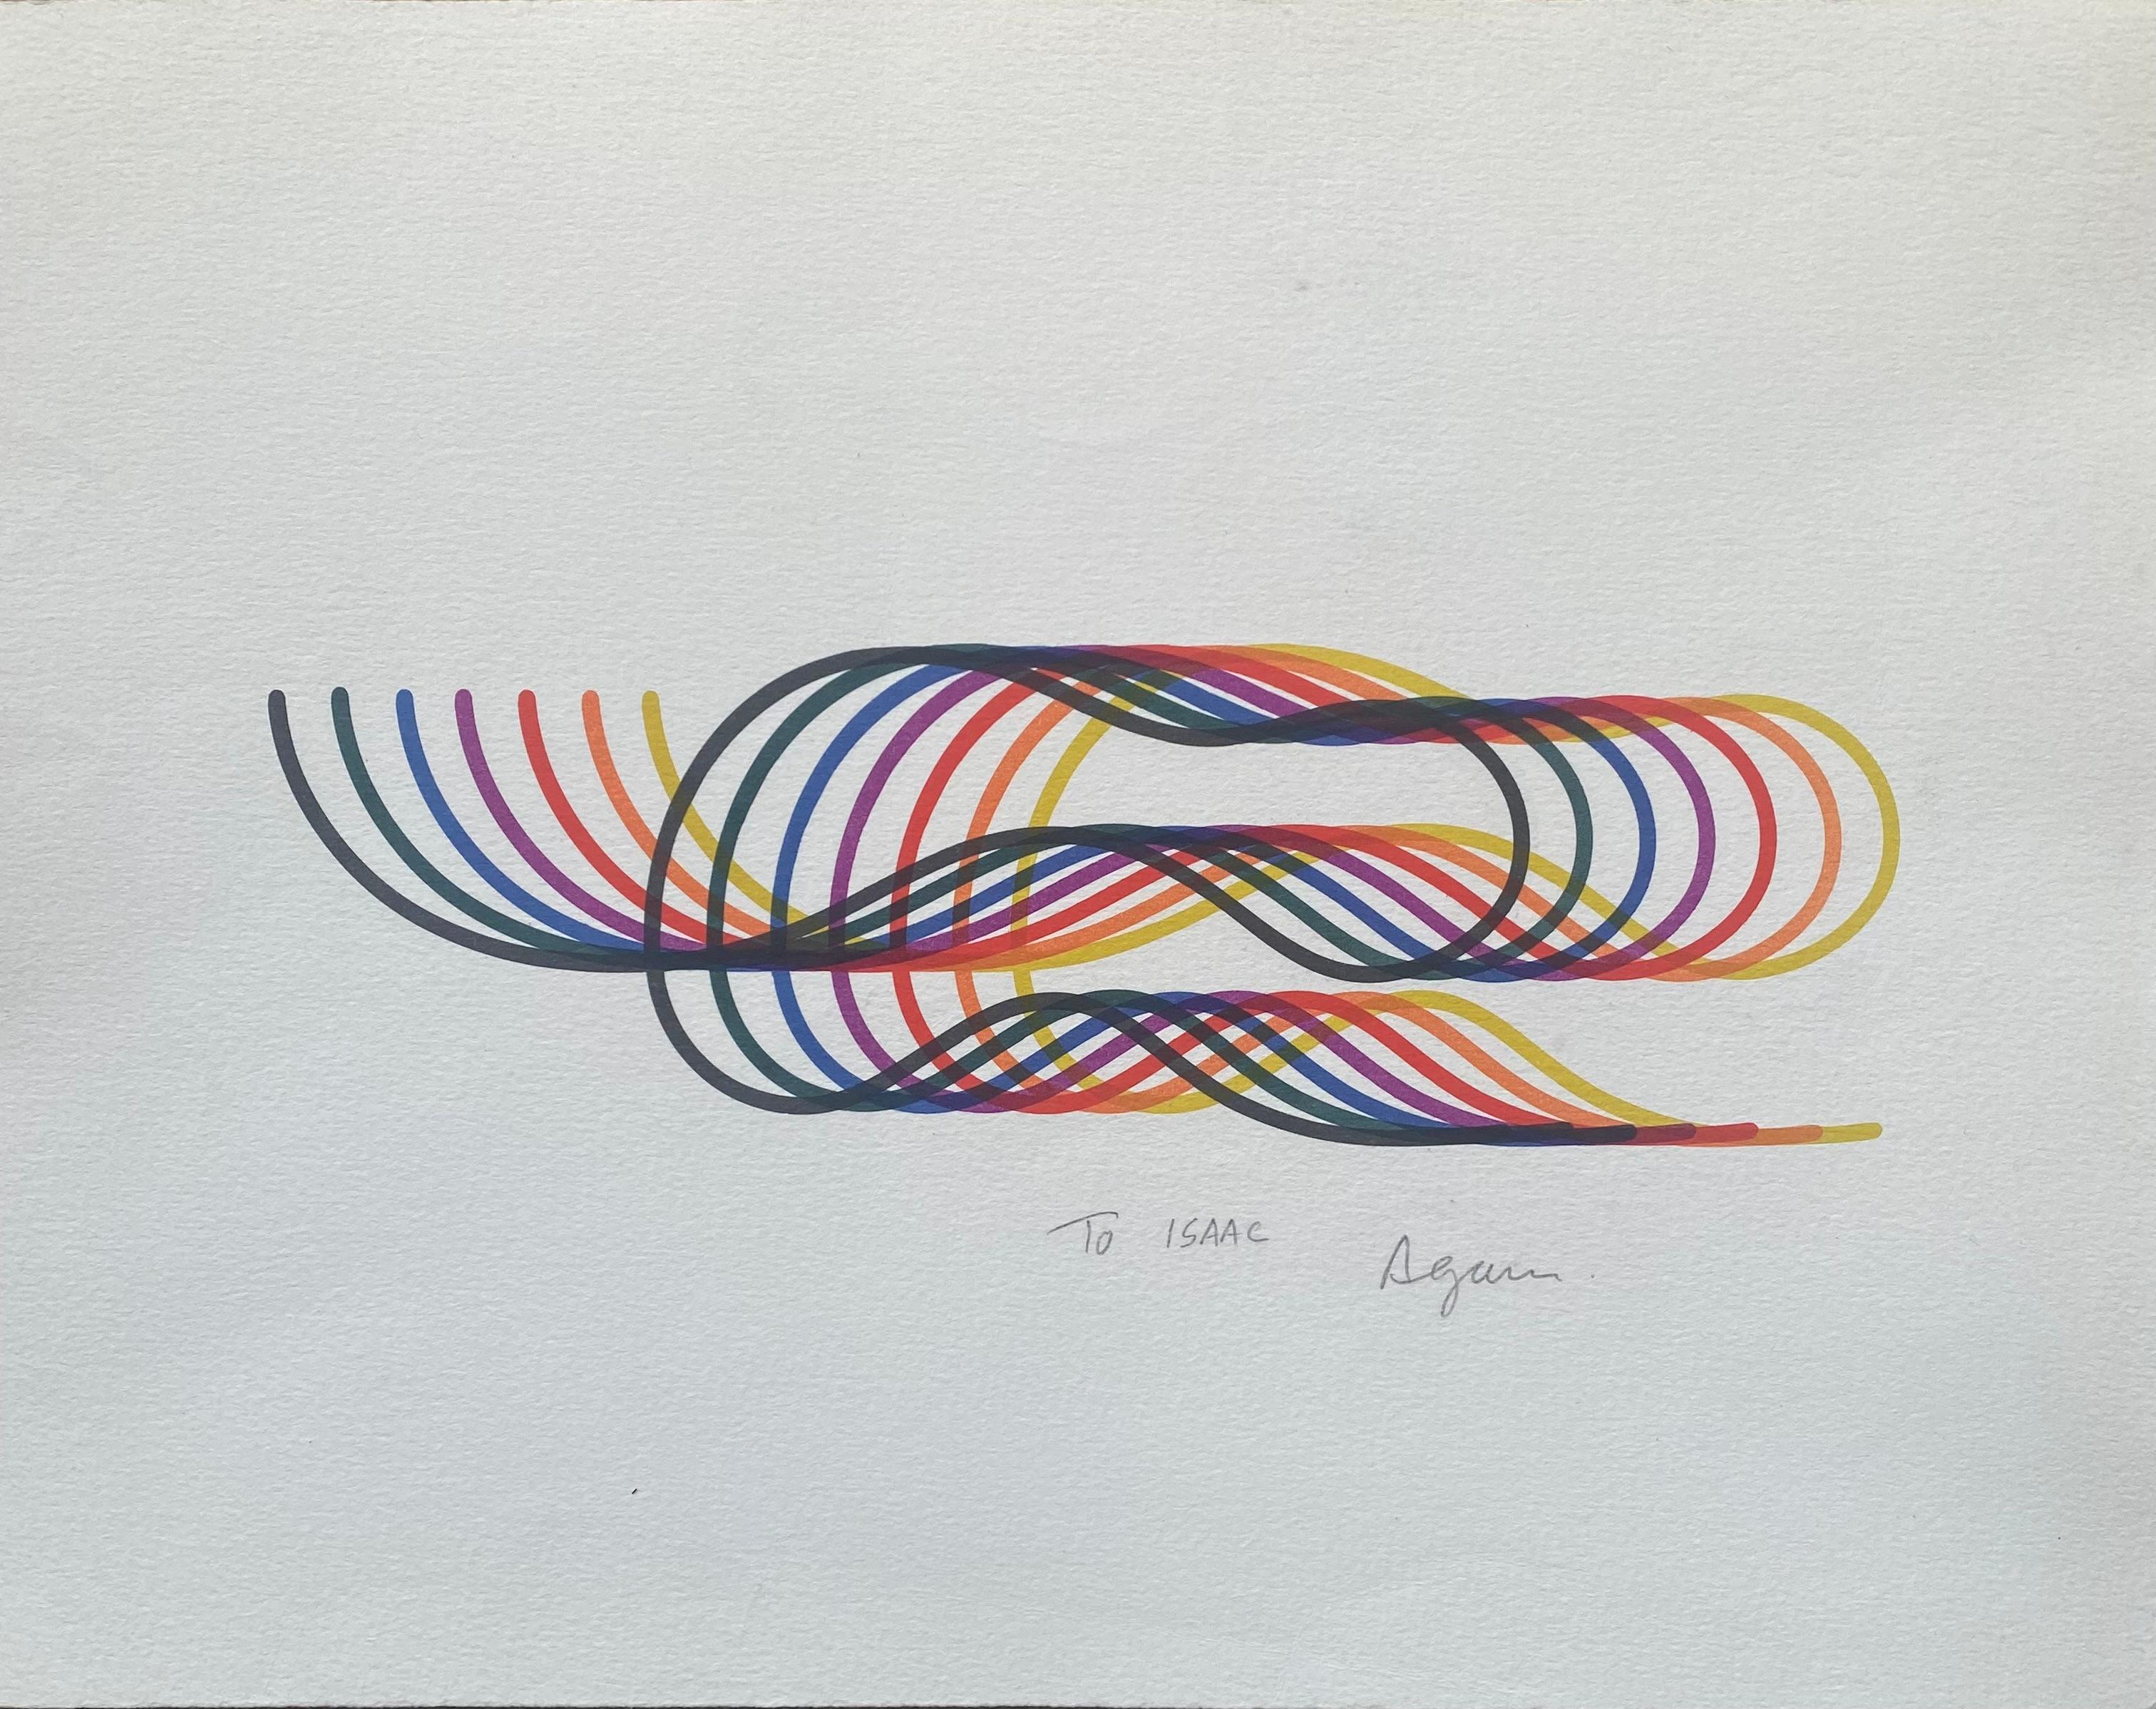 Serigraph dedicated to Isaac - Agam
Original work
Silkscreen on ARCHES paper
Dedicated to Isaac and signed in pencil by the artist
Dimensions : L34xW26,5


Yaacov Gibstein, known as Agam, is an Israeli artist born in Rishon LeZion on May 11, 1928,